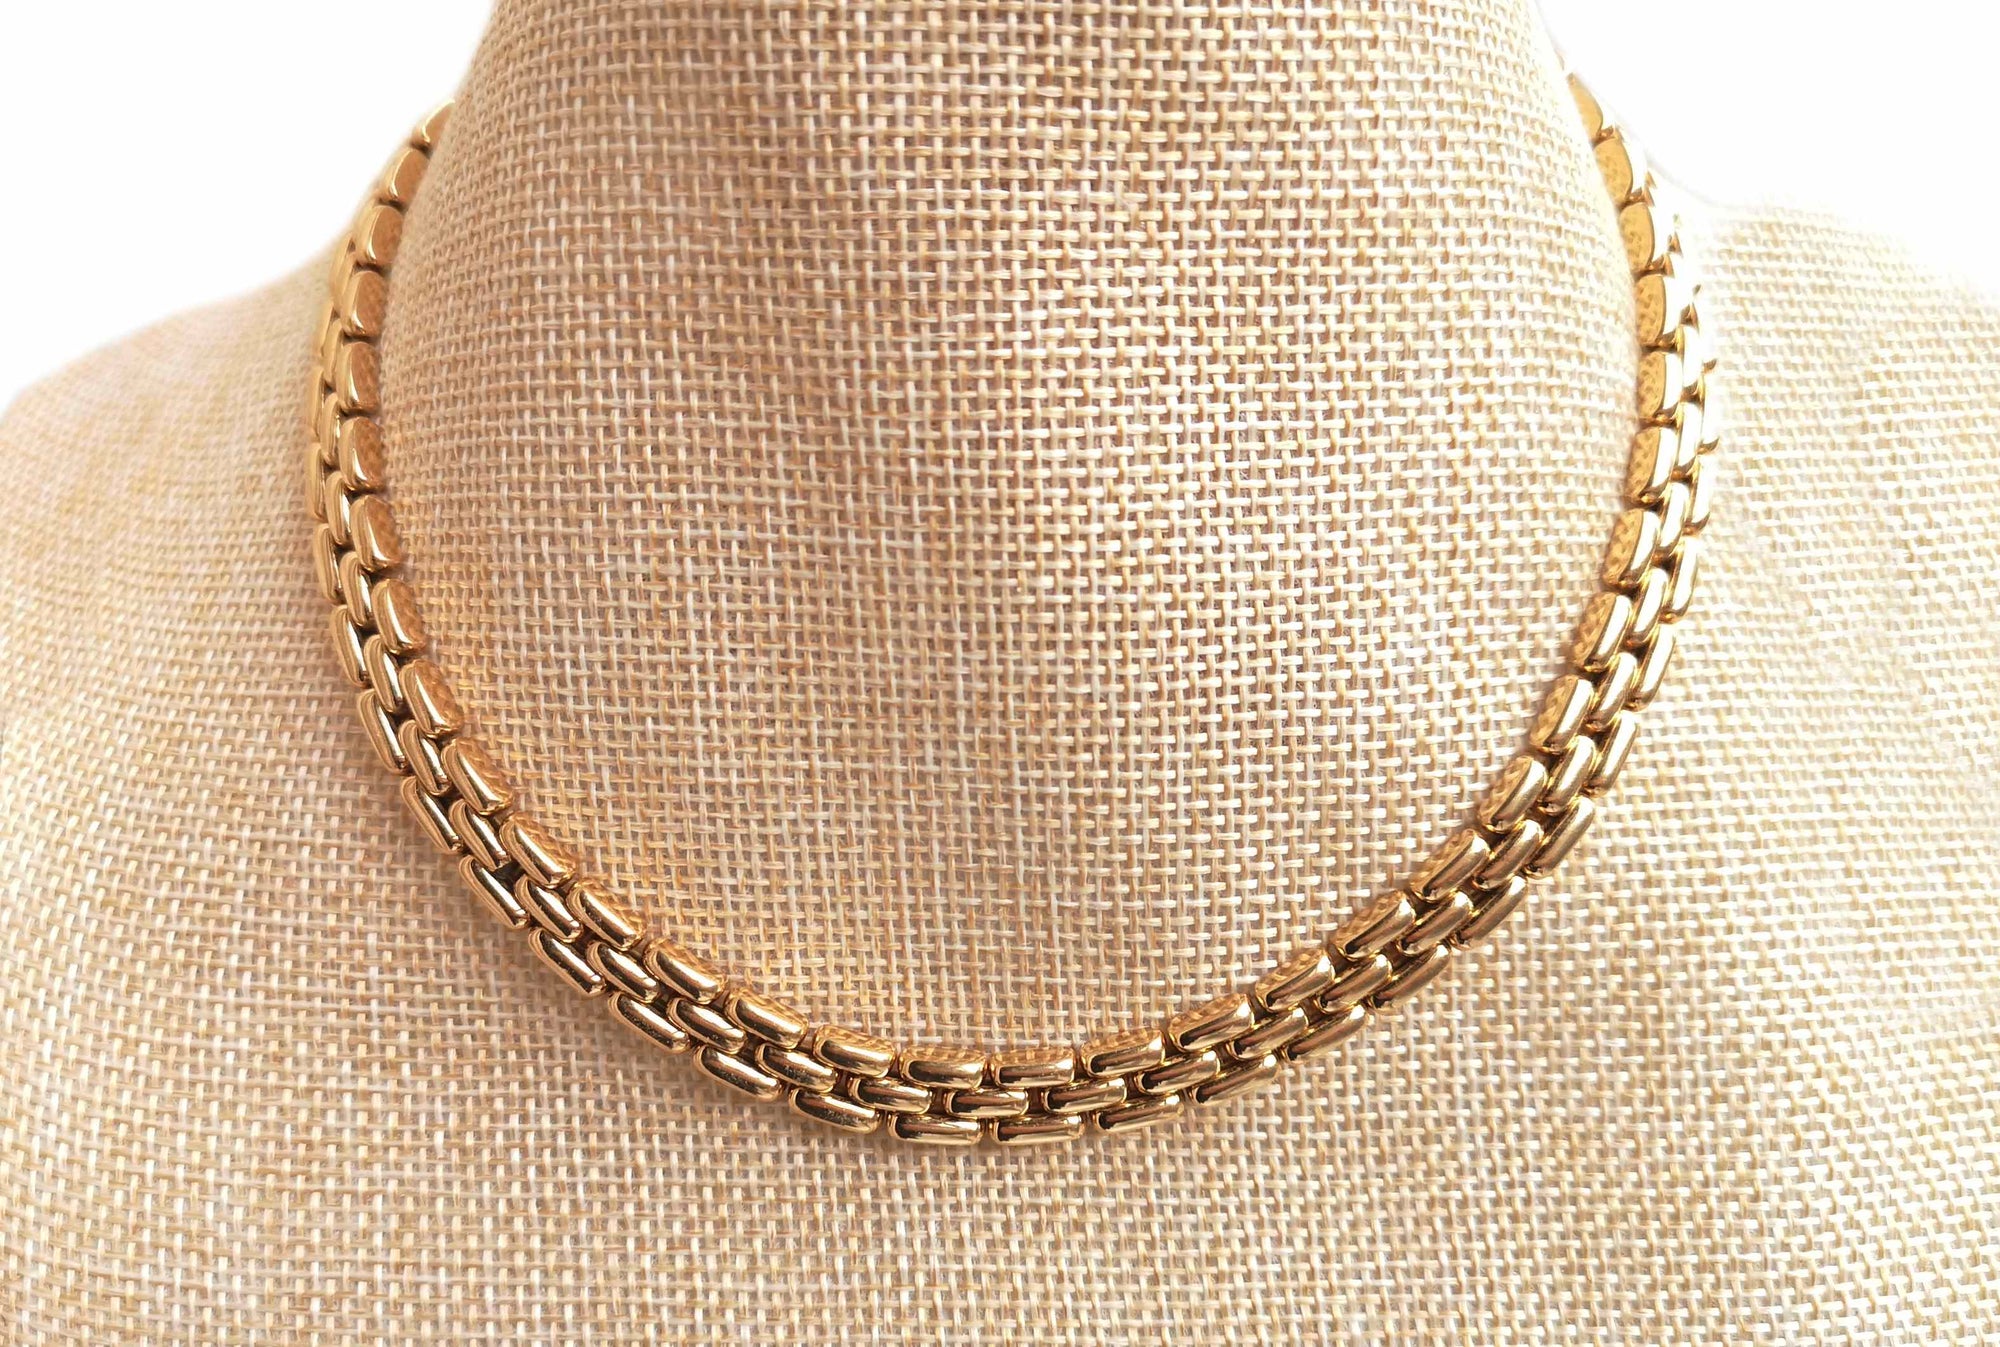 Vintage 1980s Cartier Maillon Panthere Necklace in 18K Yellow Gold, 16 inches